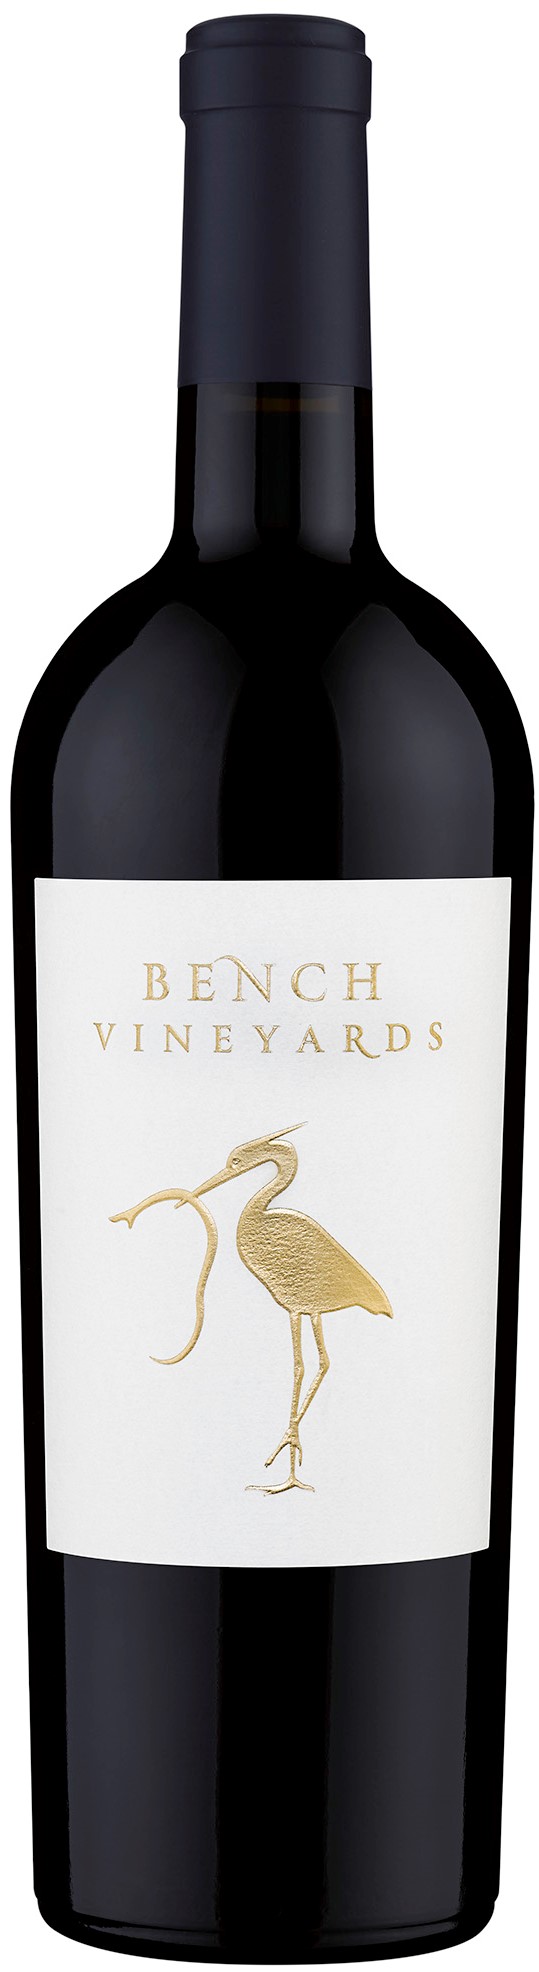 Product Image for 2017 Bench Vineyards Cabernet Sauvignon, SLD